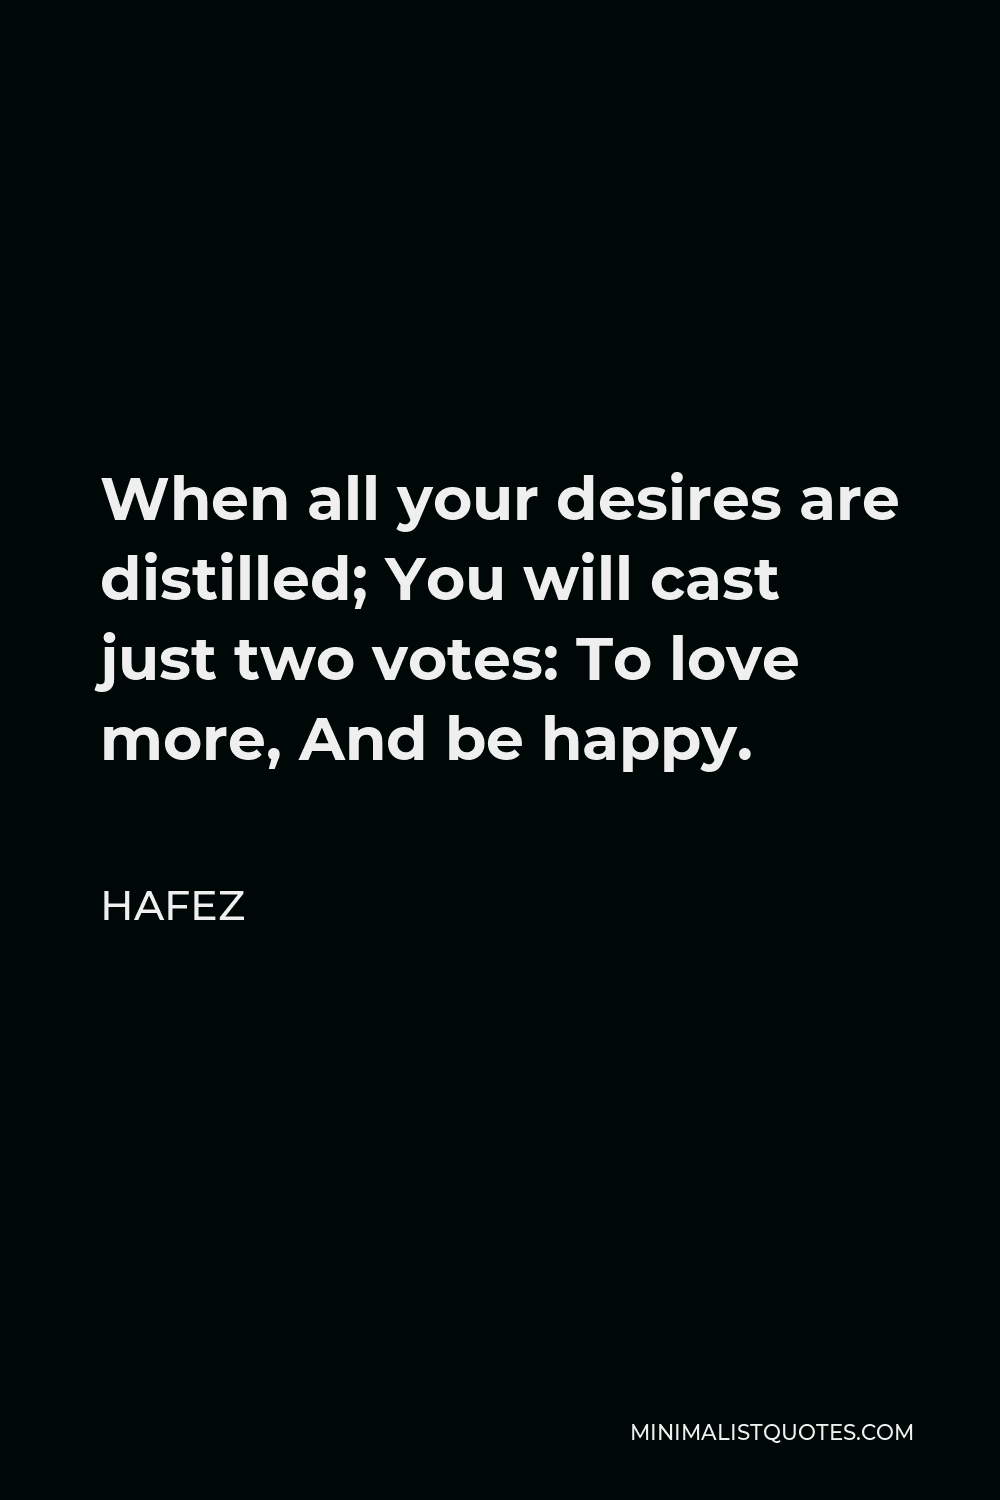 Hafez Quote - When all your desires are distilled; You will cast just two votes: To love more, And be happy.